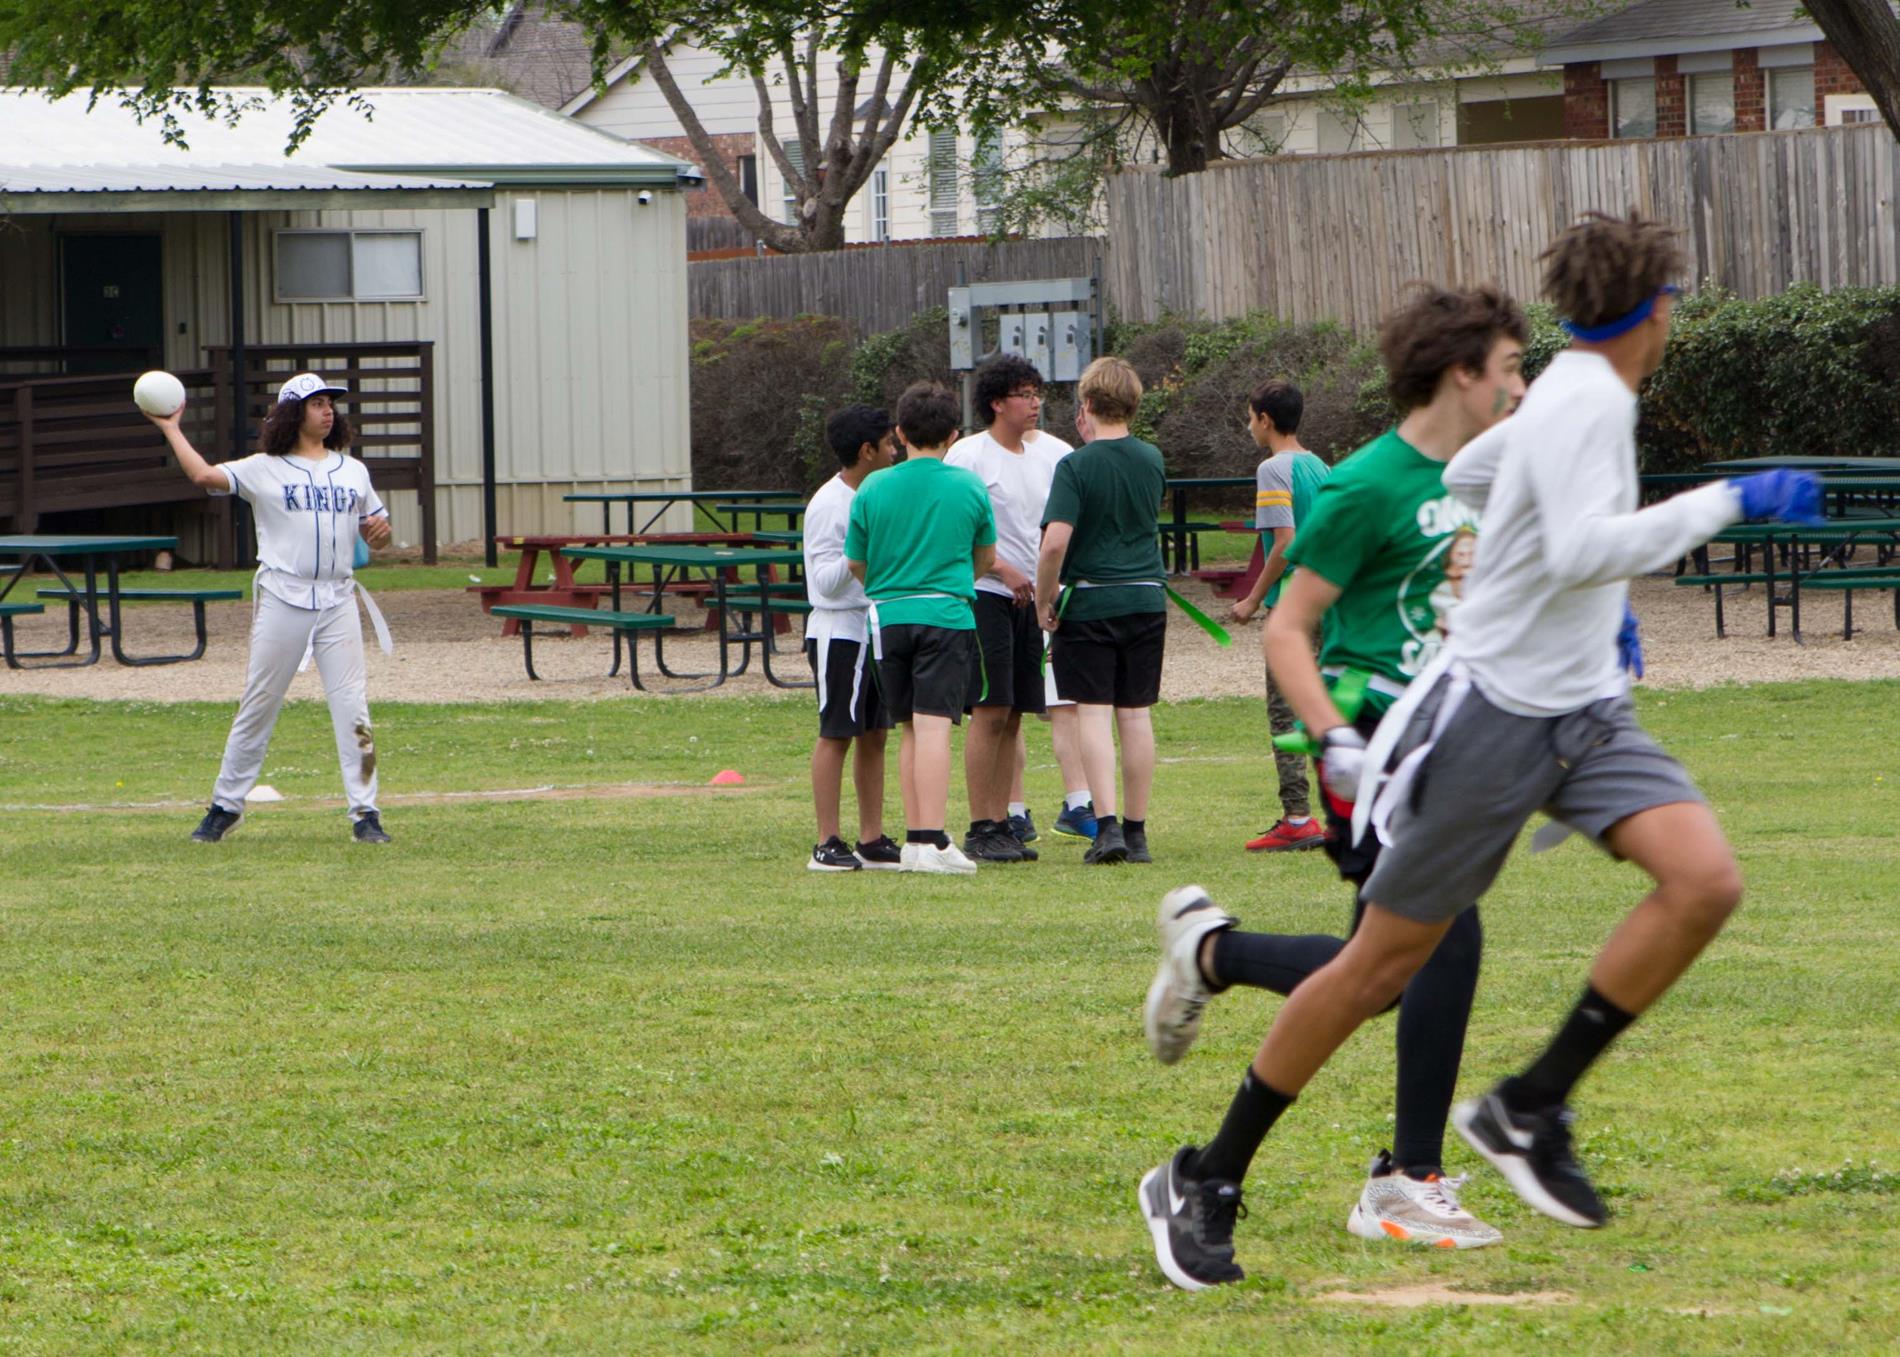 22-23 Spring Flag Football.  Thanks, Melissa Bozeman, for sharing the pictures.